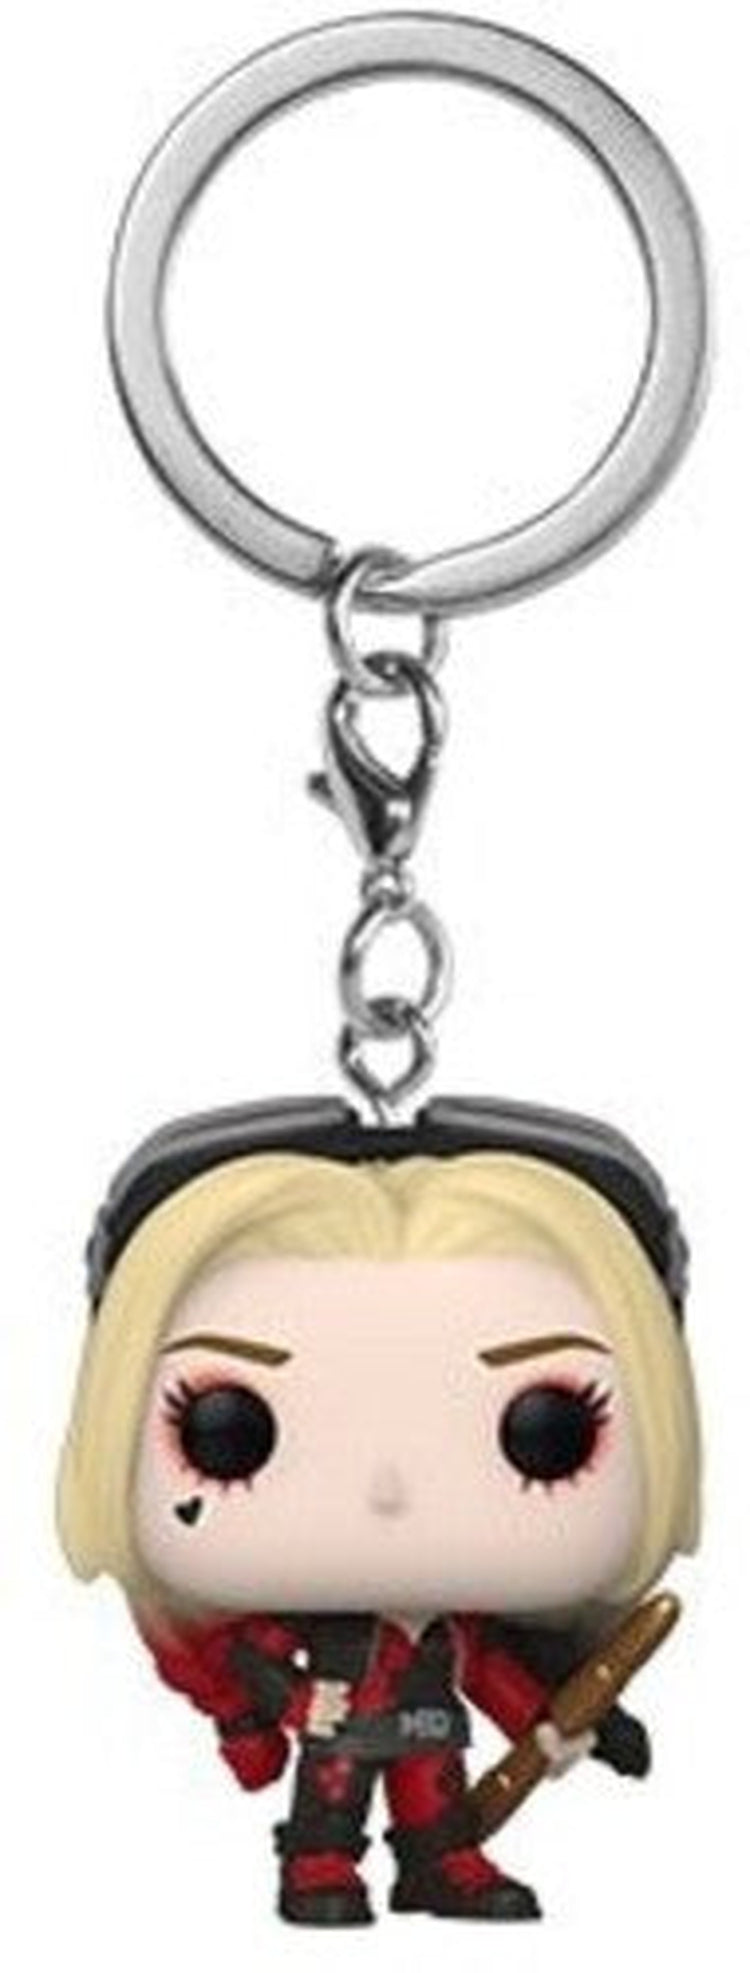 FUNKO POP! KEYCHAIN: The Suicide Squad - Harley Quinn (Bodysuit)